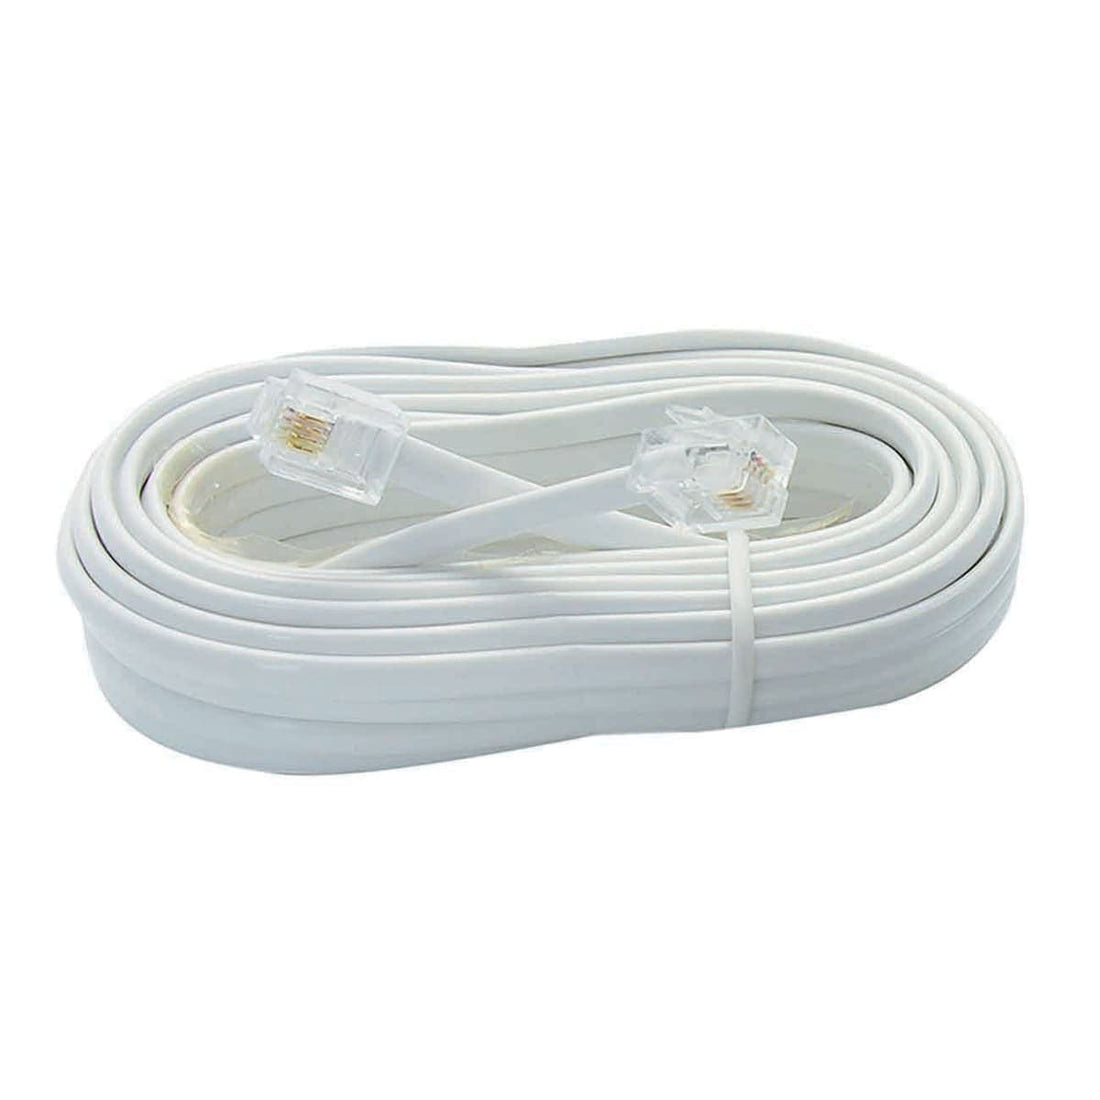 RJ11 MALE/MALE TELEPHONE EXTENSION CABLE 3MT EVOLOGY - best price from Maltashopper.com BR420230960